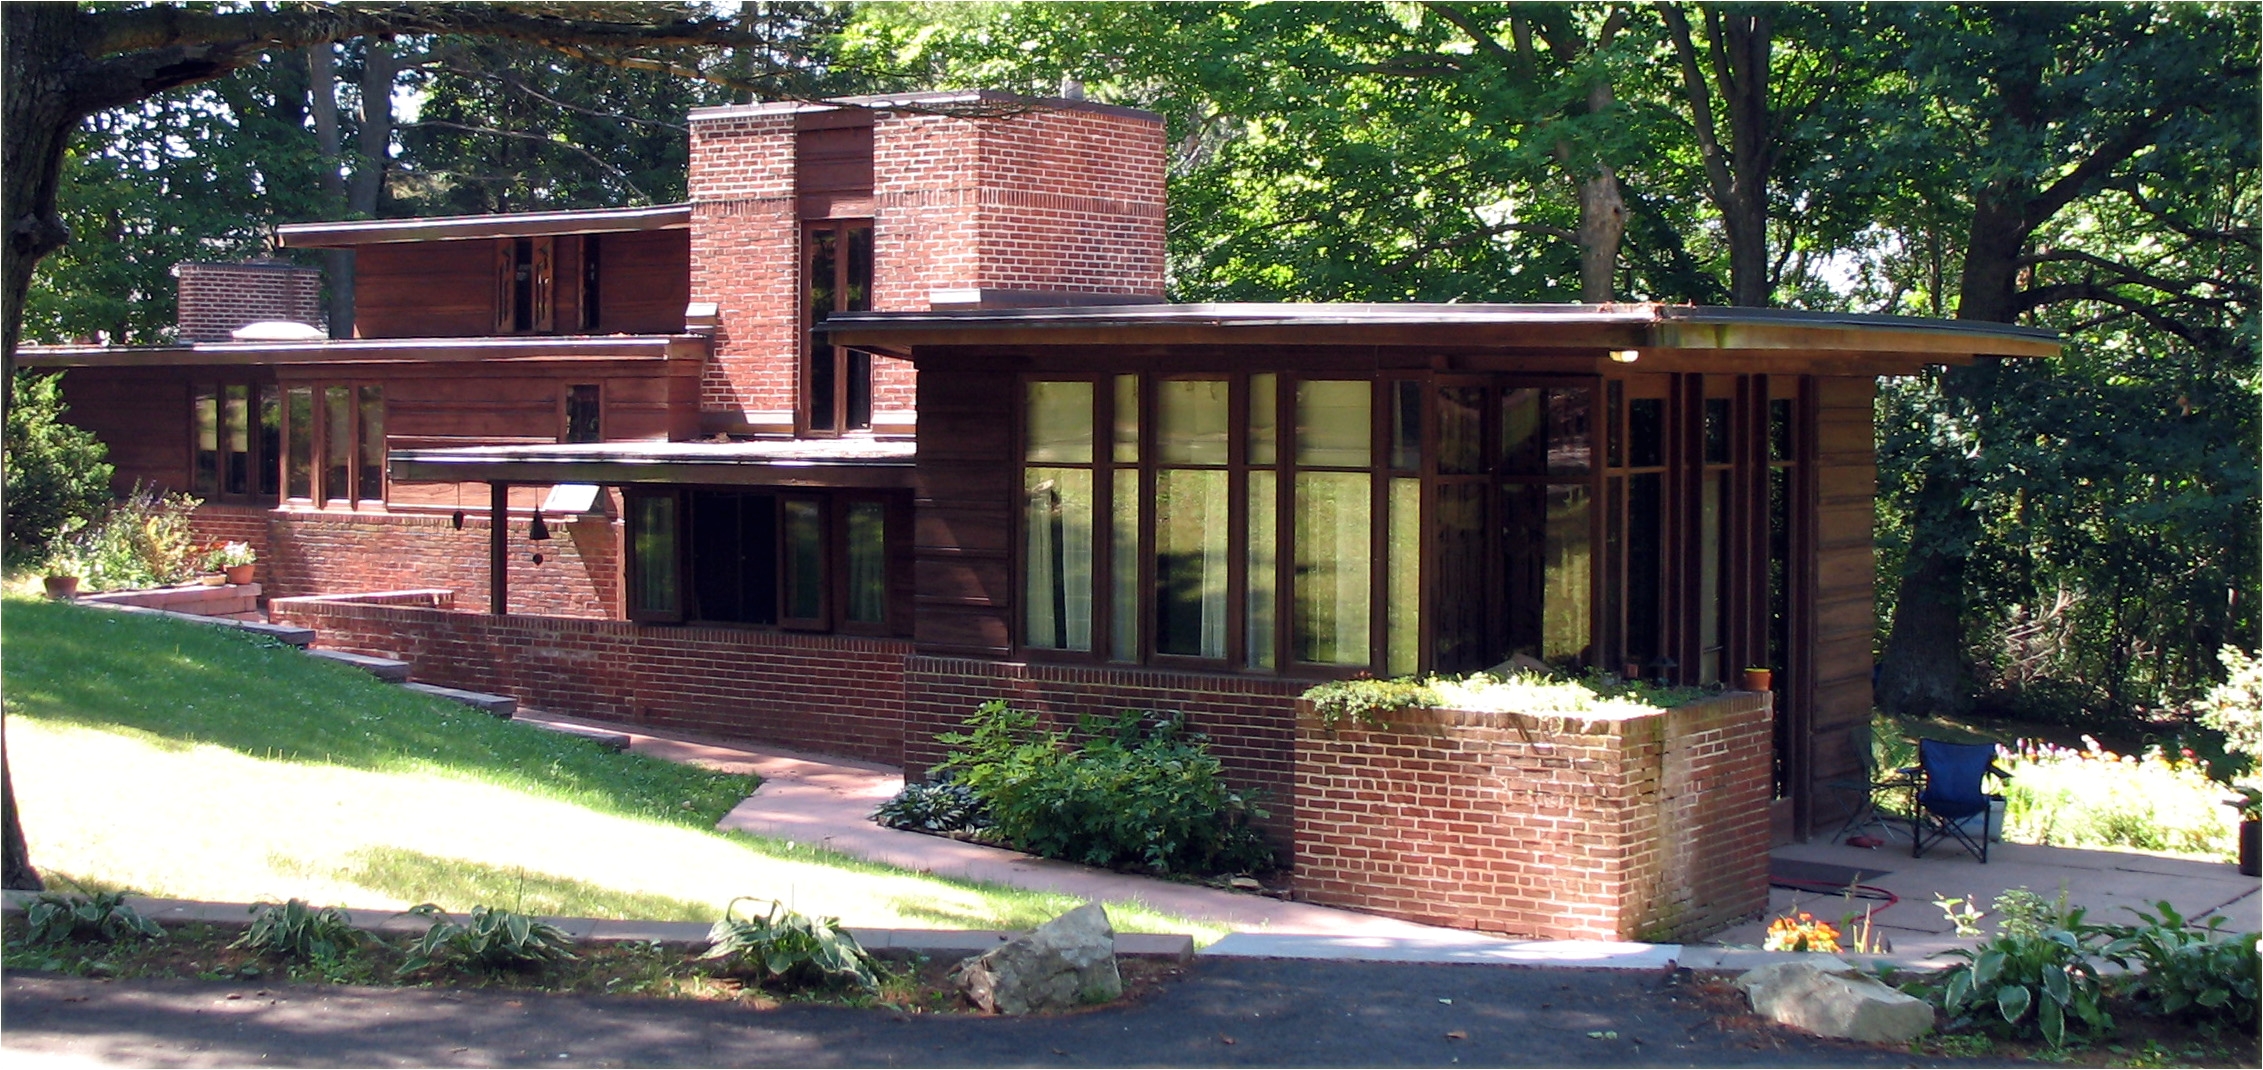 Frank Lloyd Wright Inspired Small House Plans Frank Lloyd Wright Type House Plans Emergencymanagementsummit org